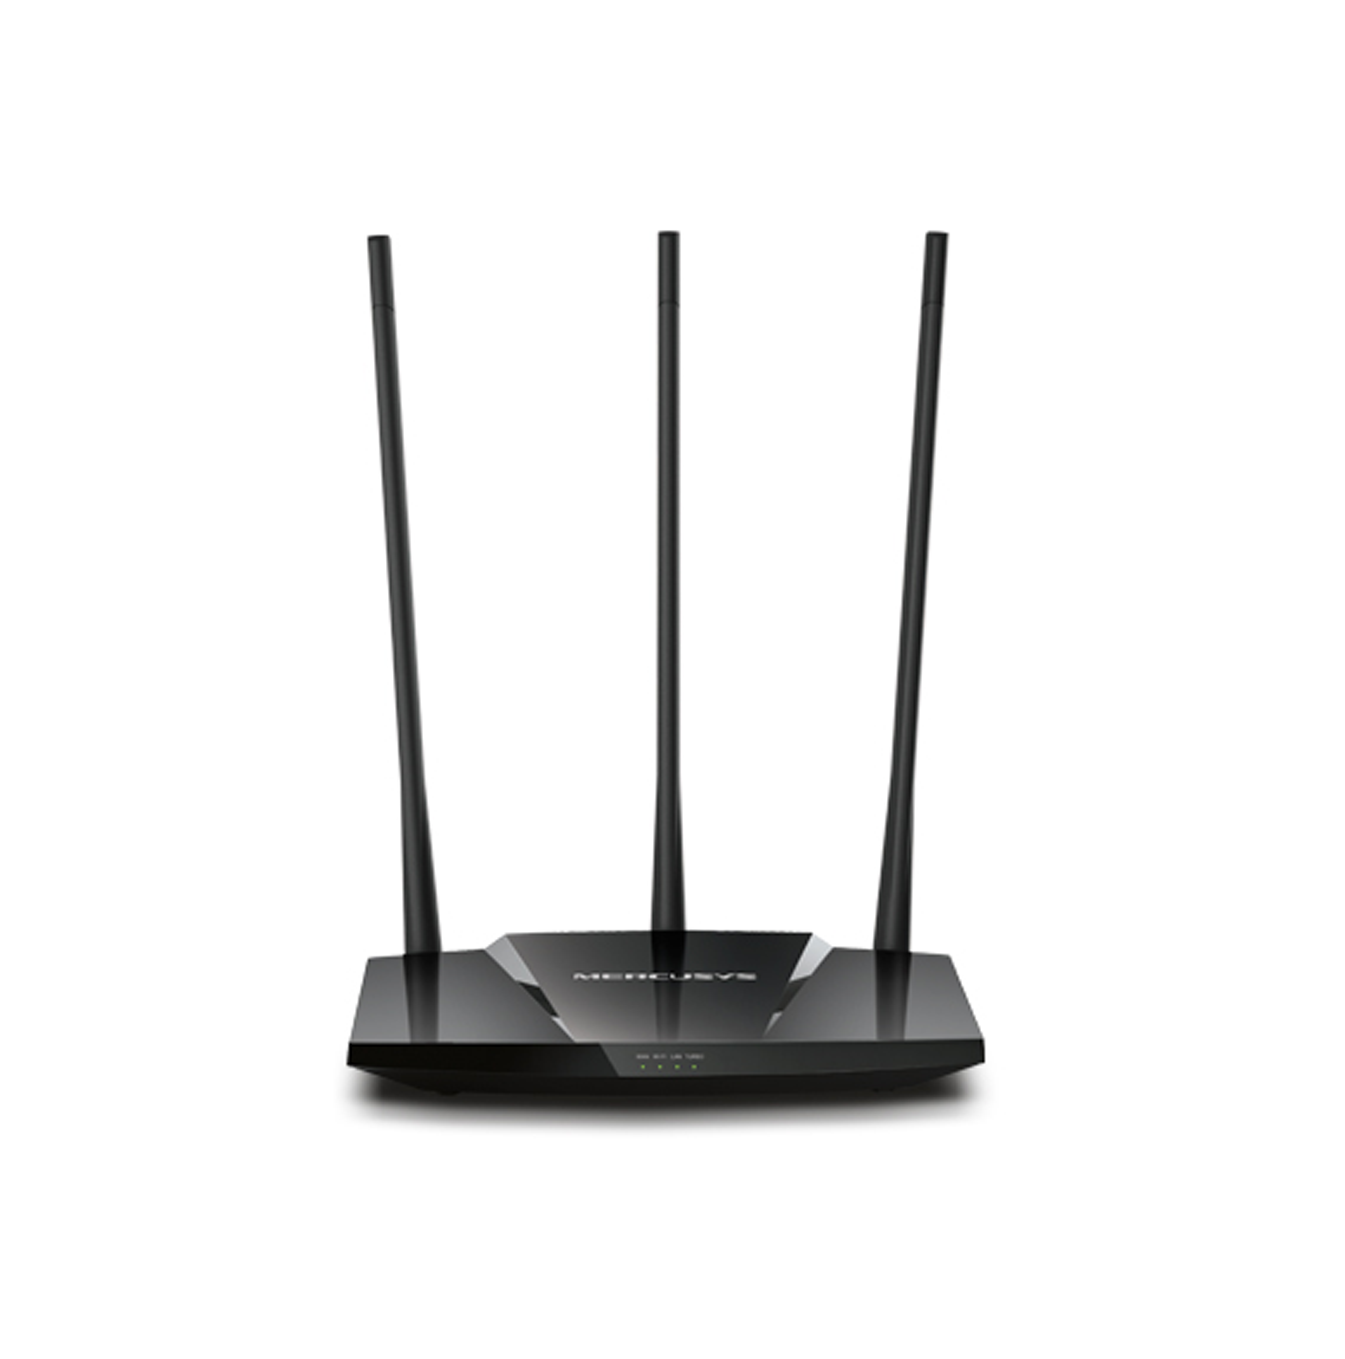 Router inalámbrico Mercusys 300MBPS high power MW330HP (UN) Marca: Mercusys By TP-Link